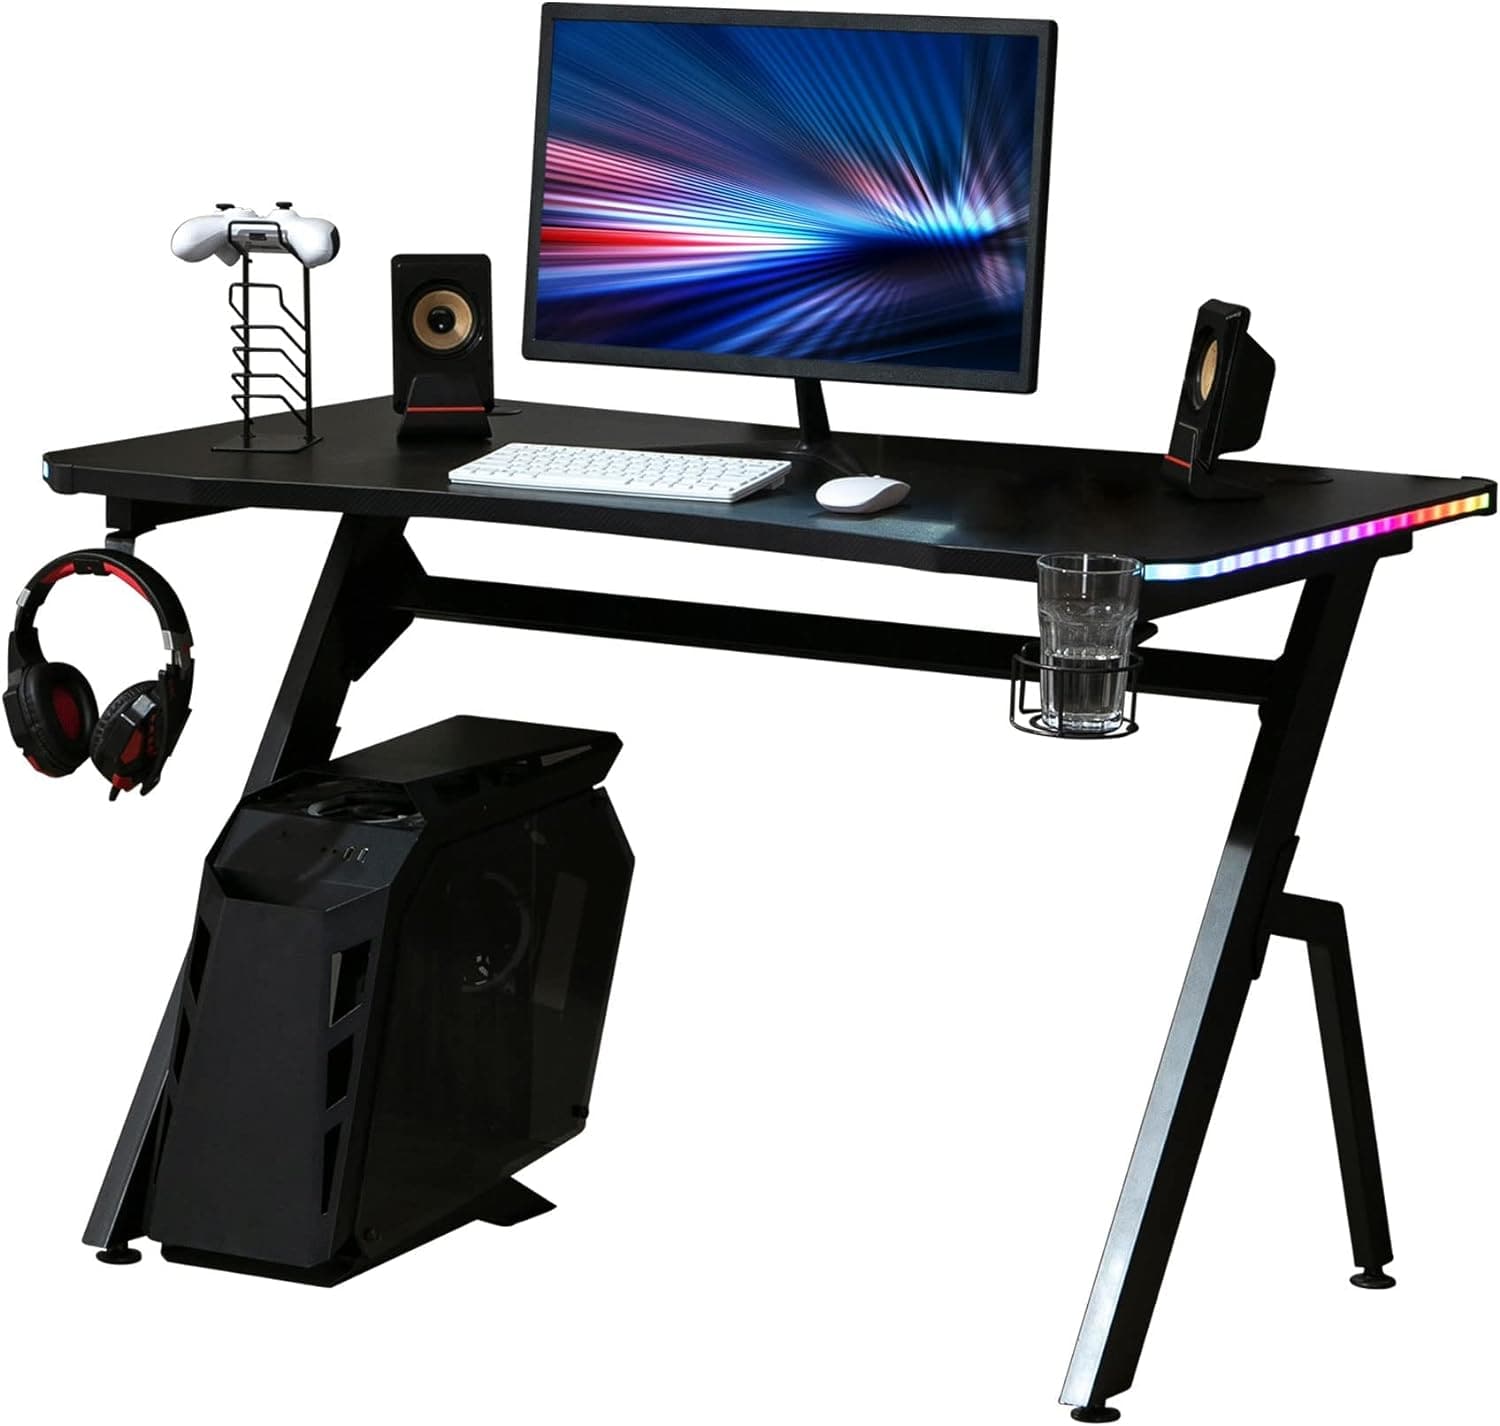 Maplin Plus Racing Style Gaming Desk with RGB LED Lights, Carbon Fibre Surface, Headphone Hook, Cup Holder & Controller Rack (Black)